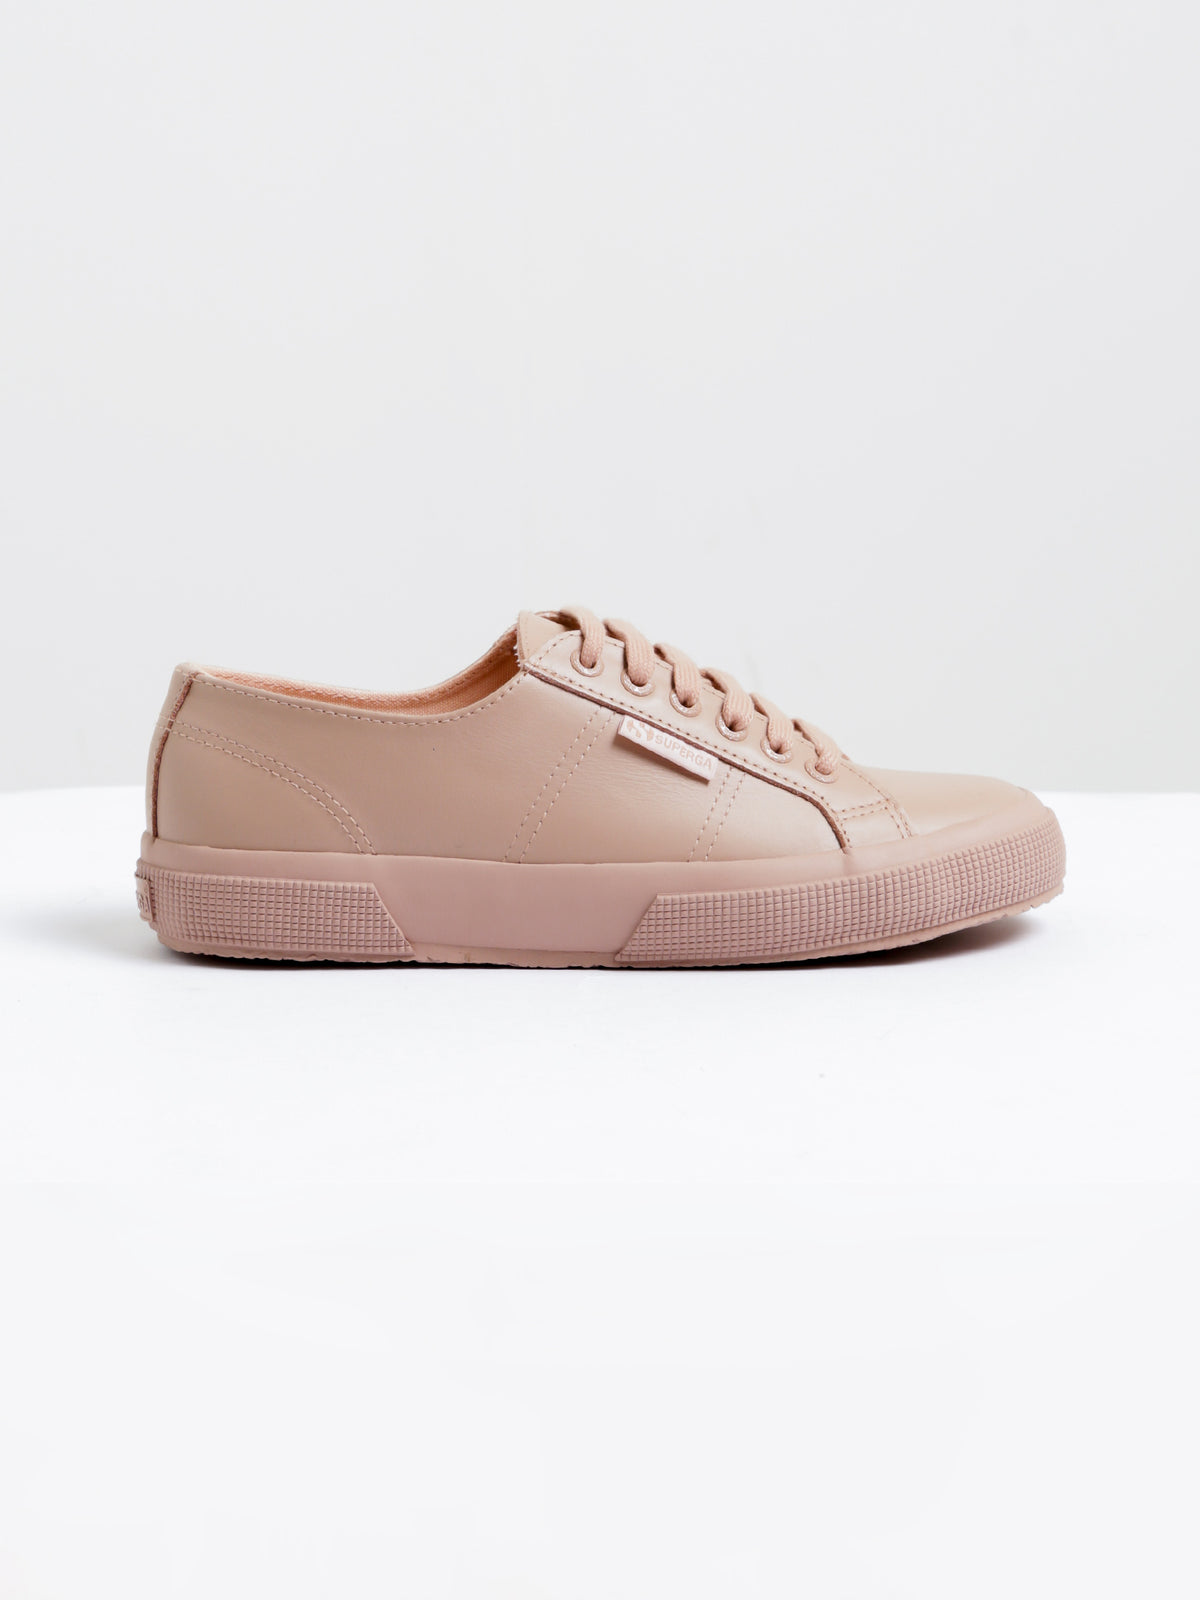 Womens 2750 FGLU Sneakers in Light Pink Leather